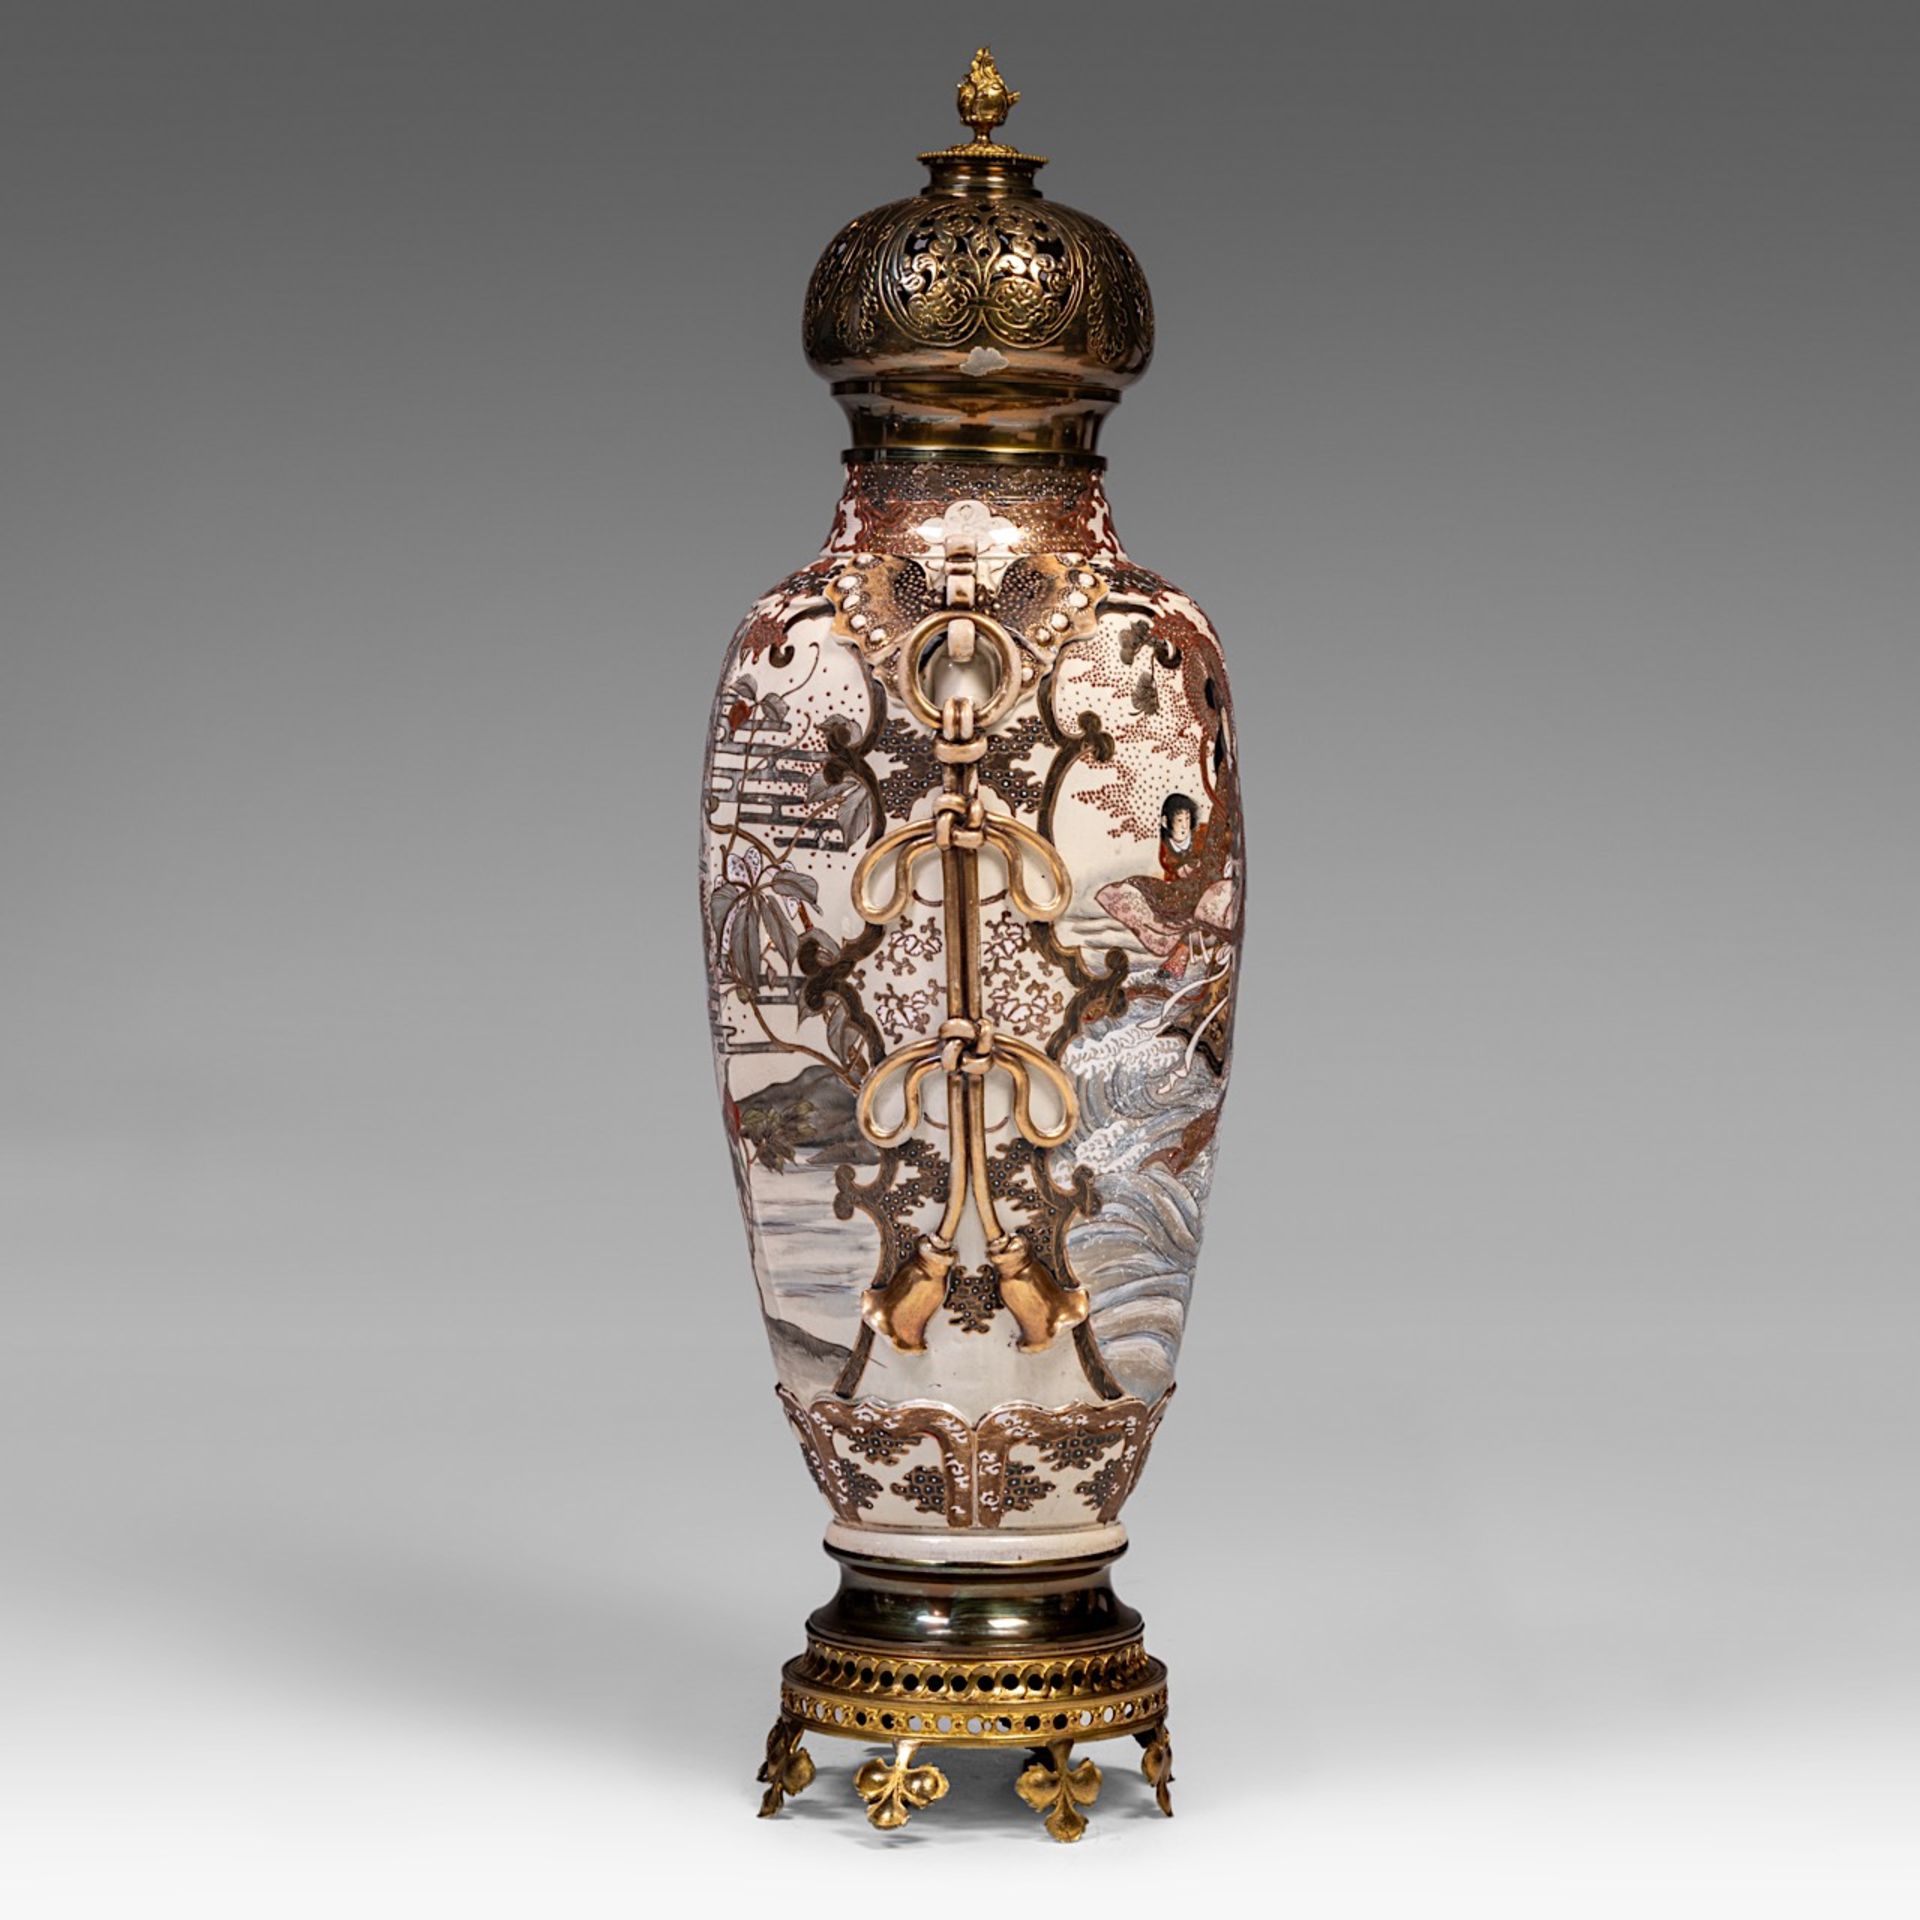 A large Japanese Satsuma vase with gilt bronze lid and base, late 19thC/20thC, total H 108 cm - Image 2 of 6